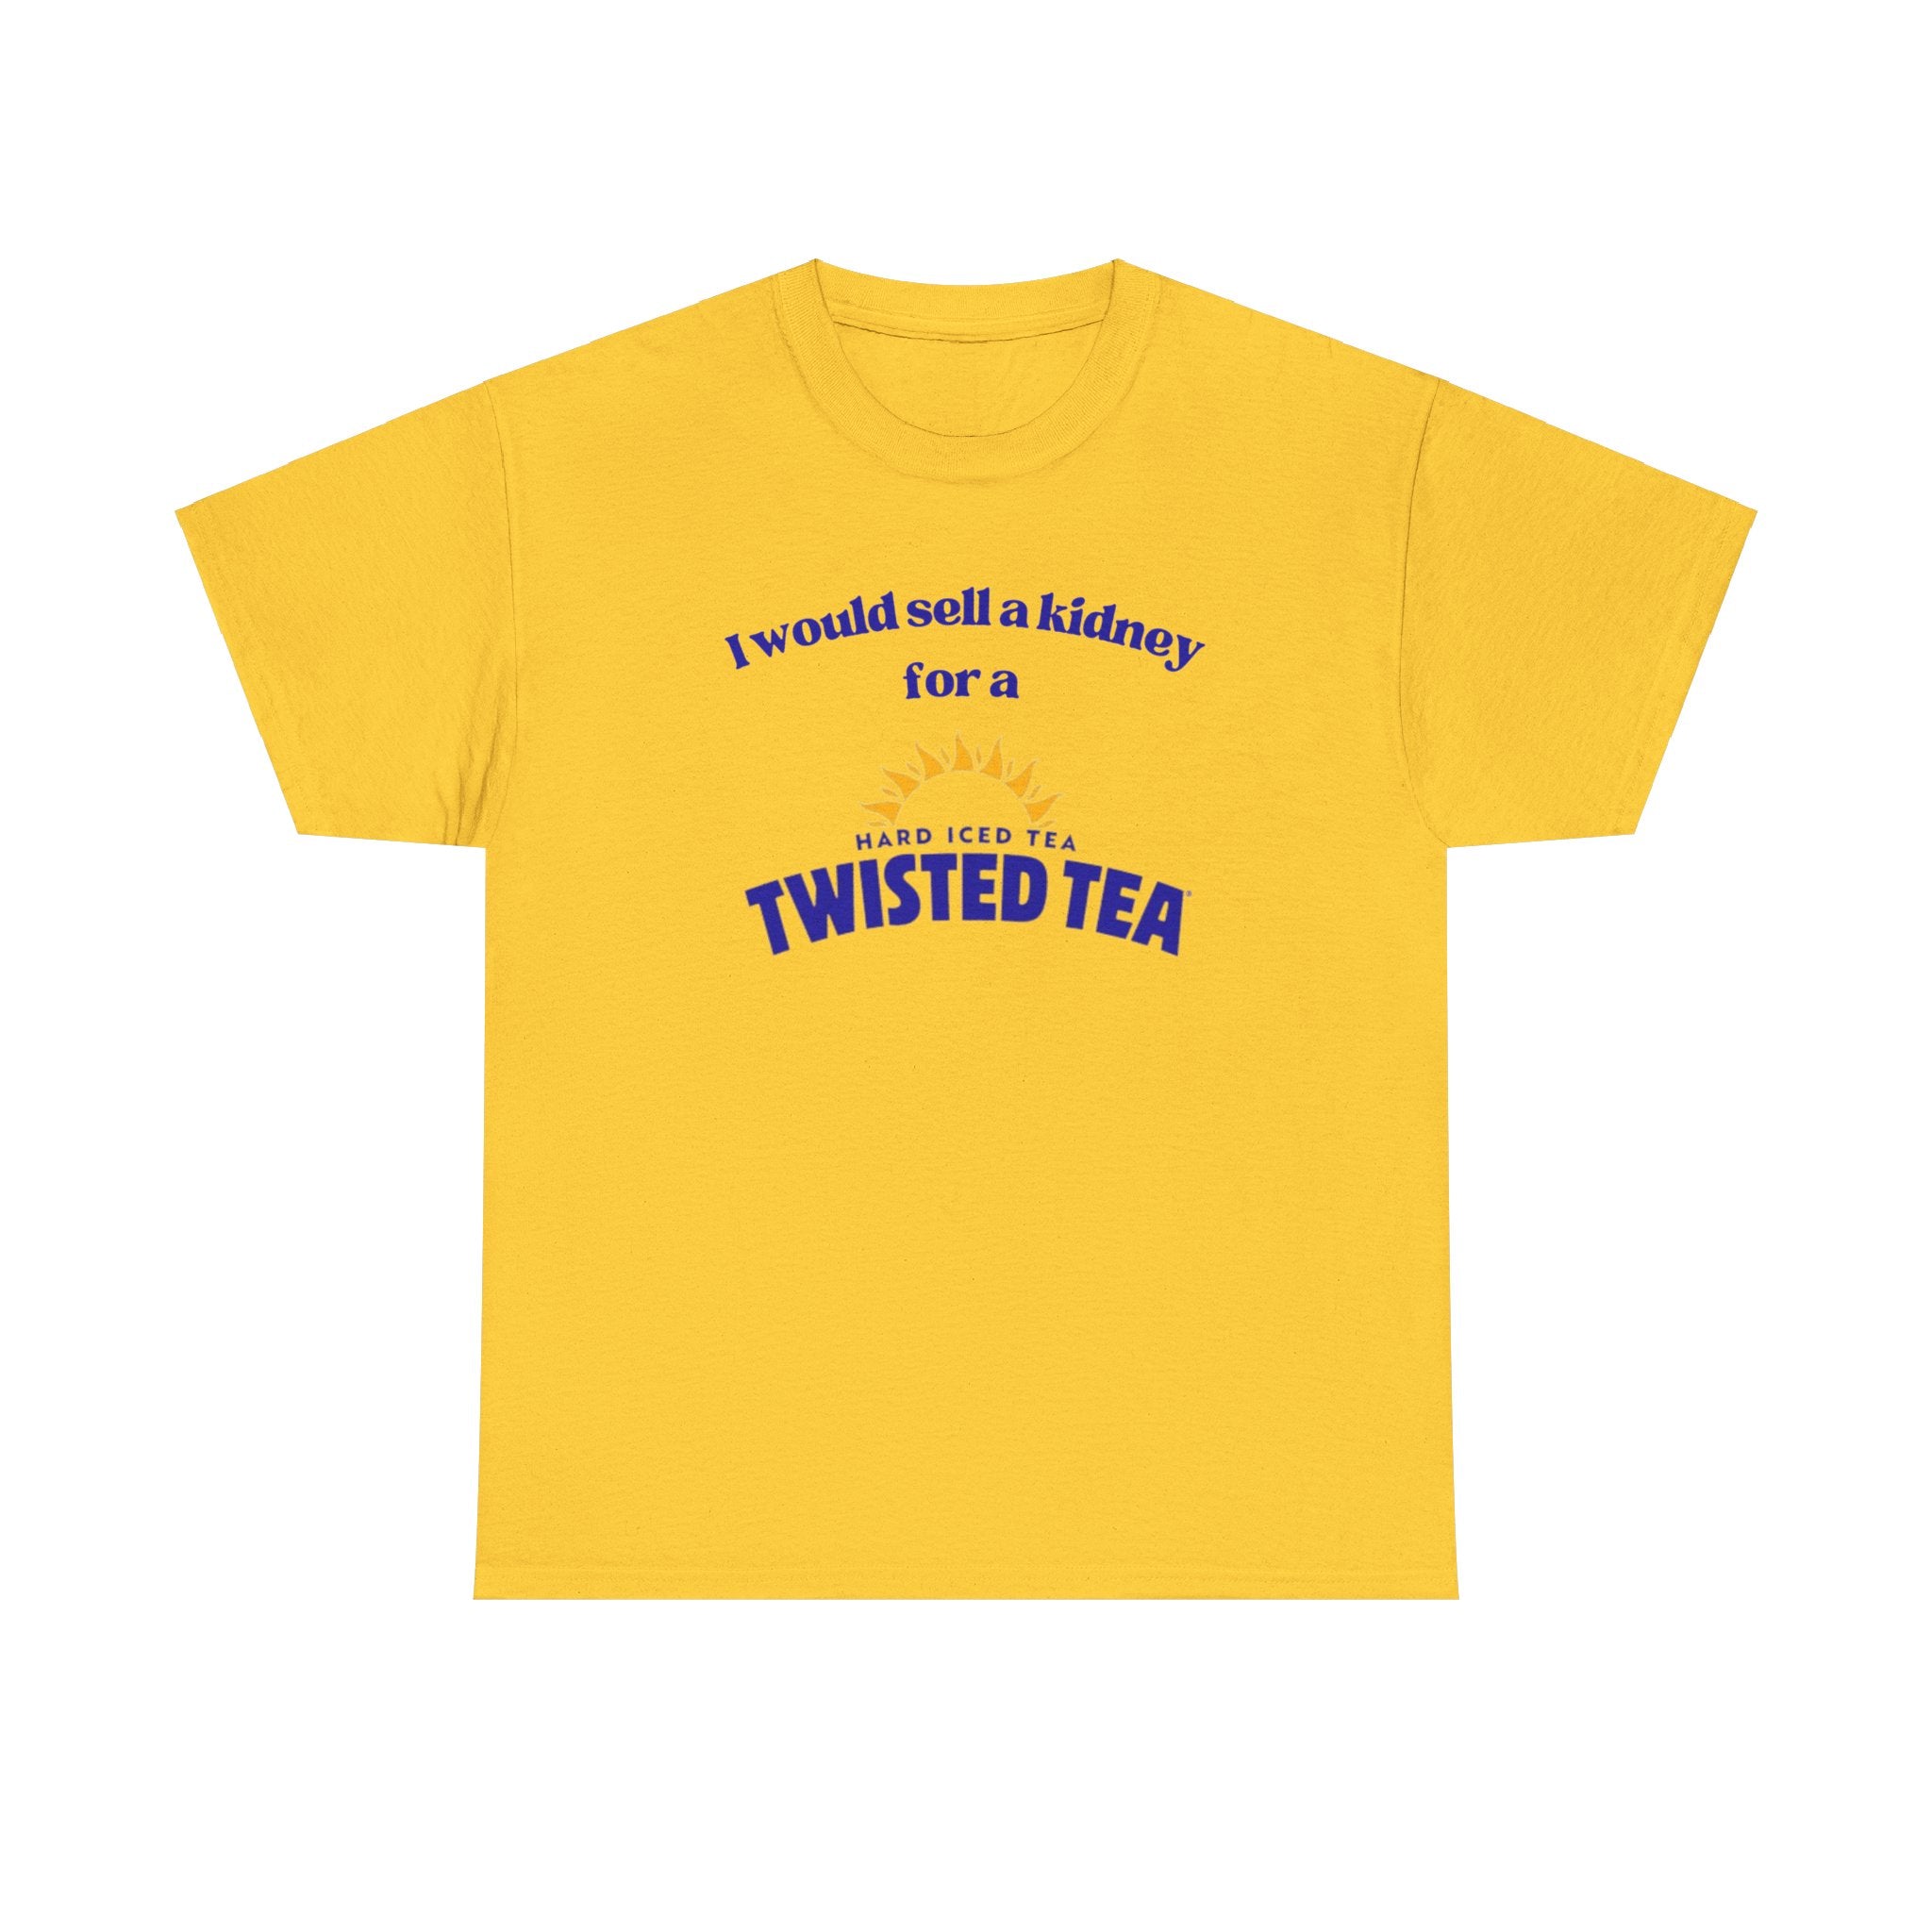 I Would Sell a Kidney for a Twisted Tea